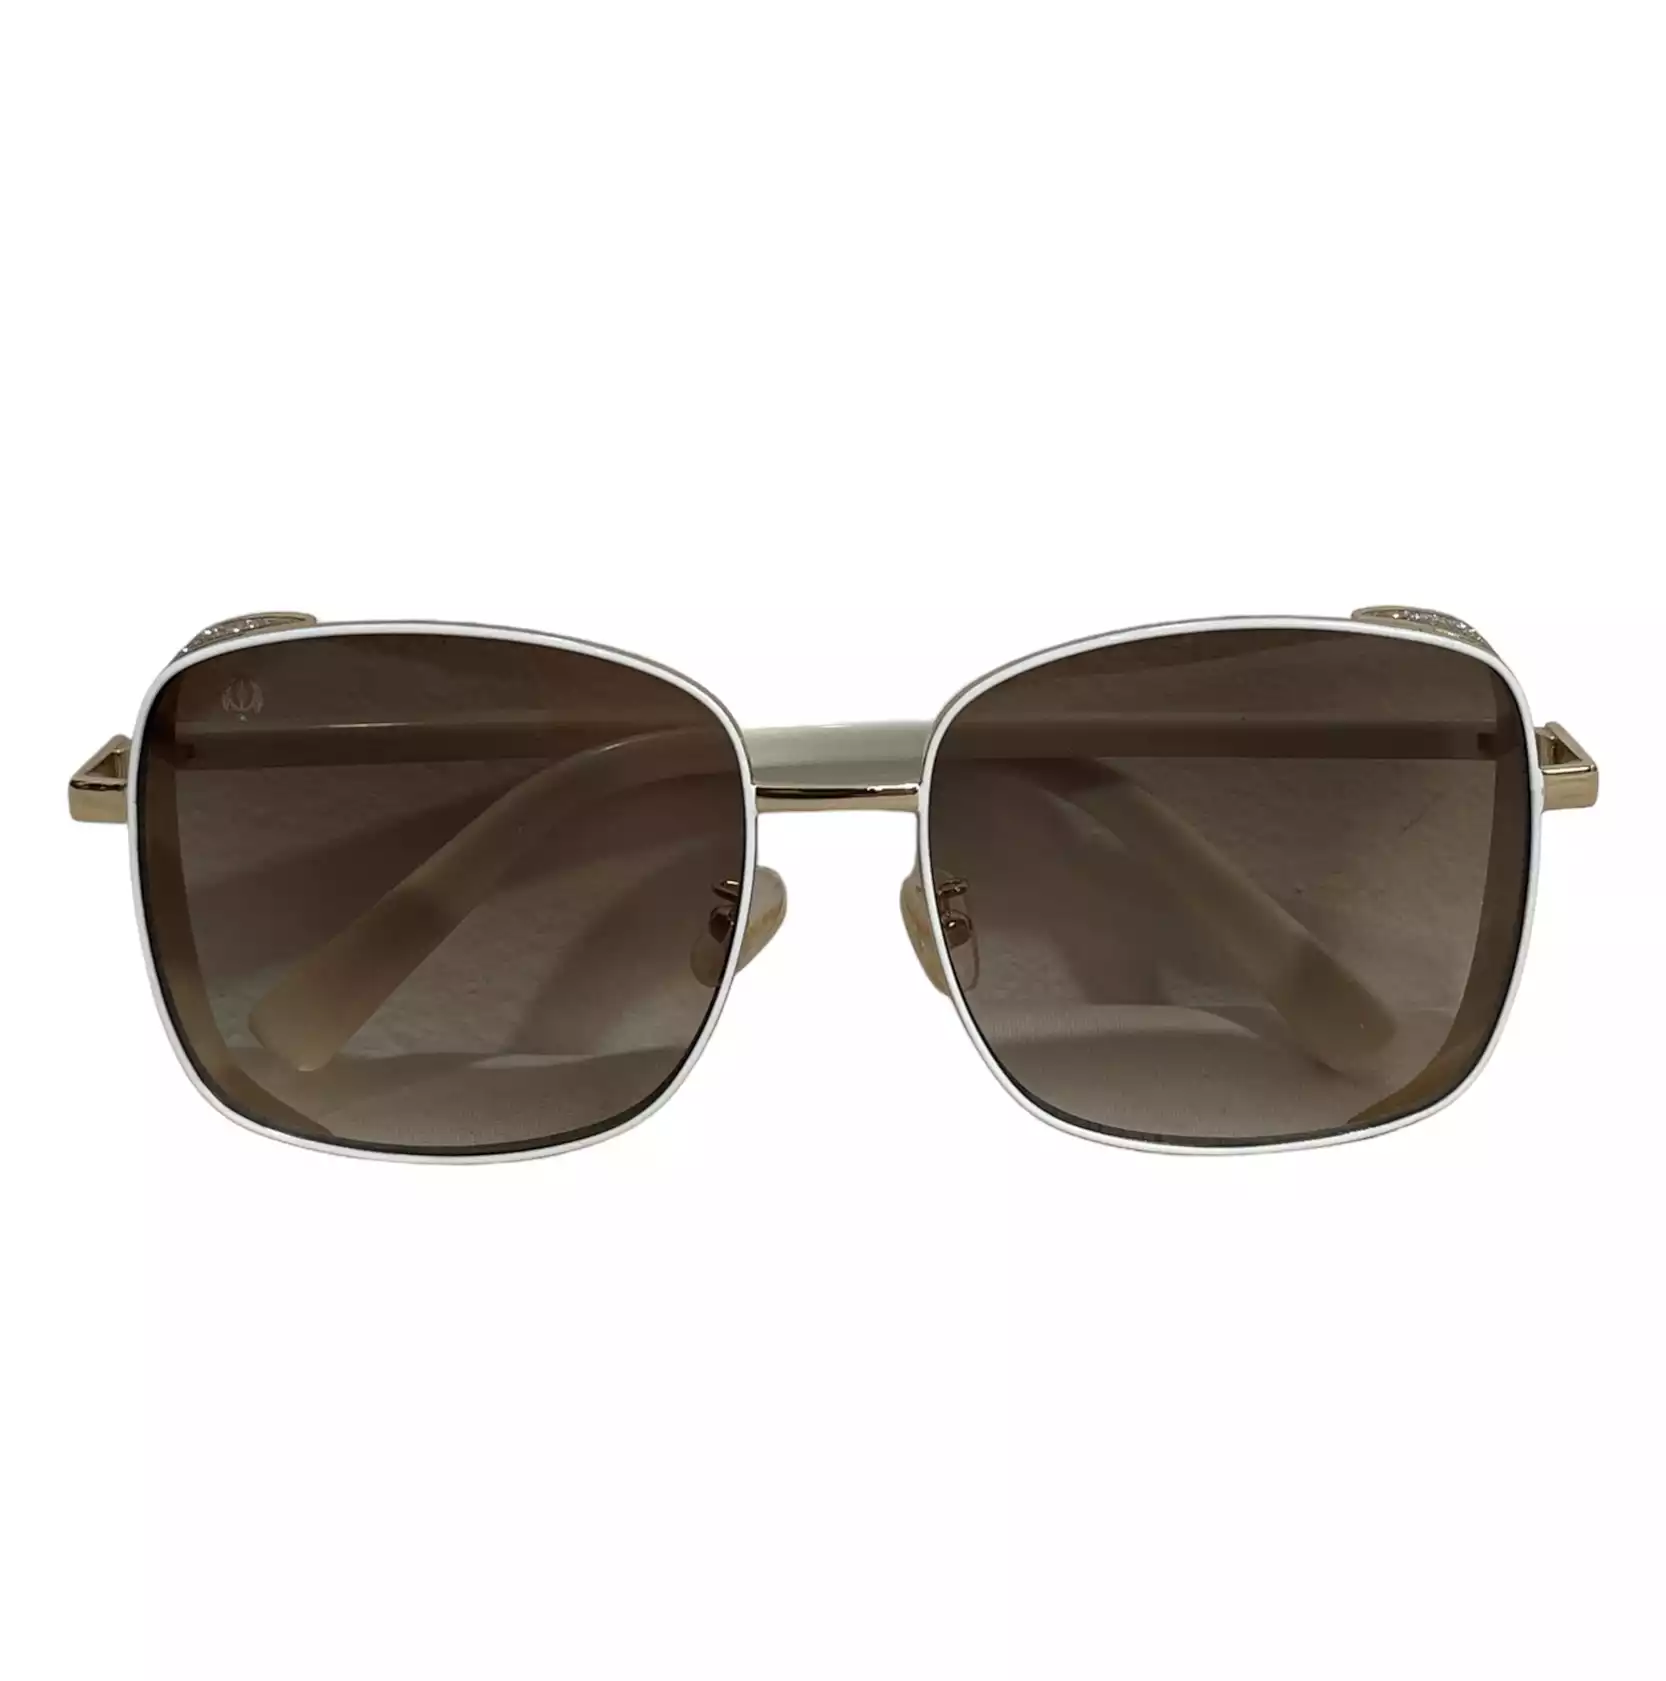 Sunglasses by Vintage